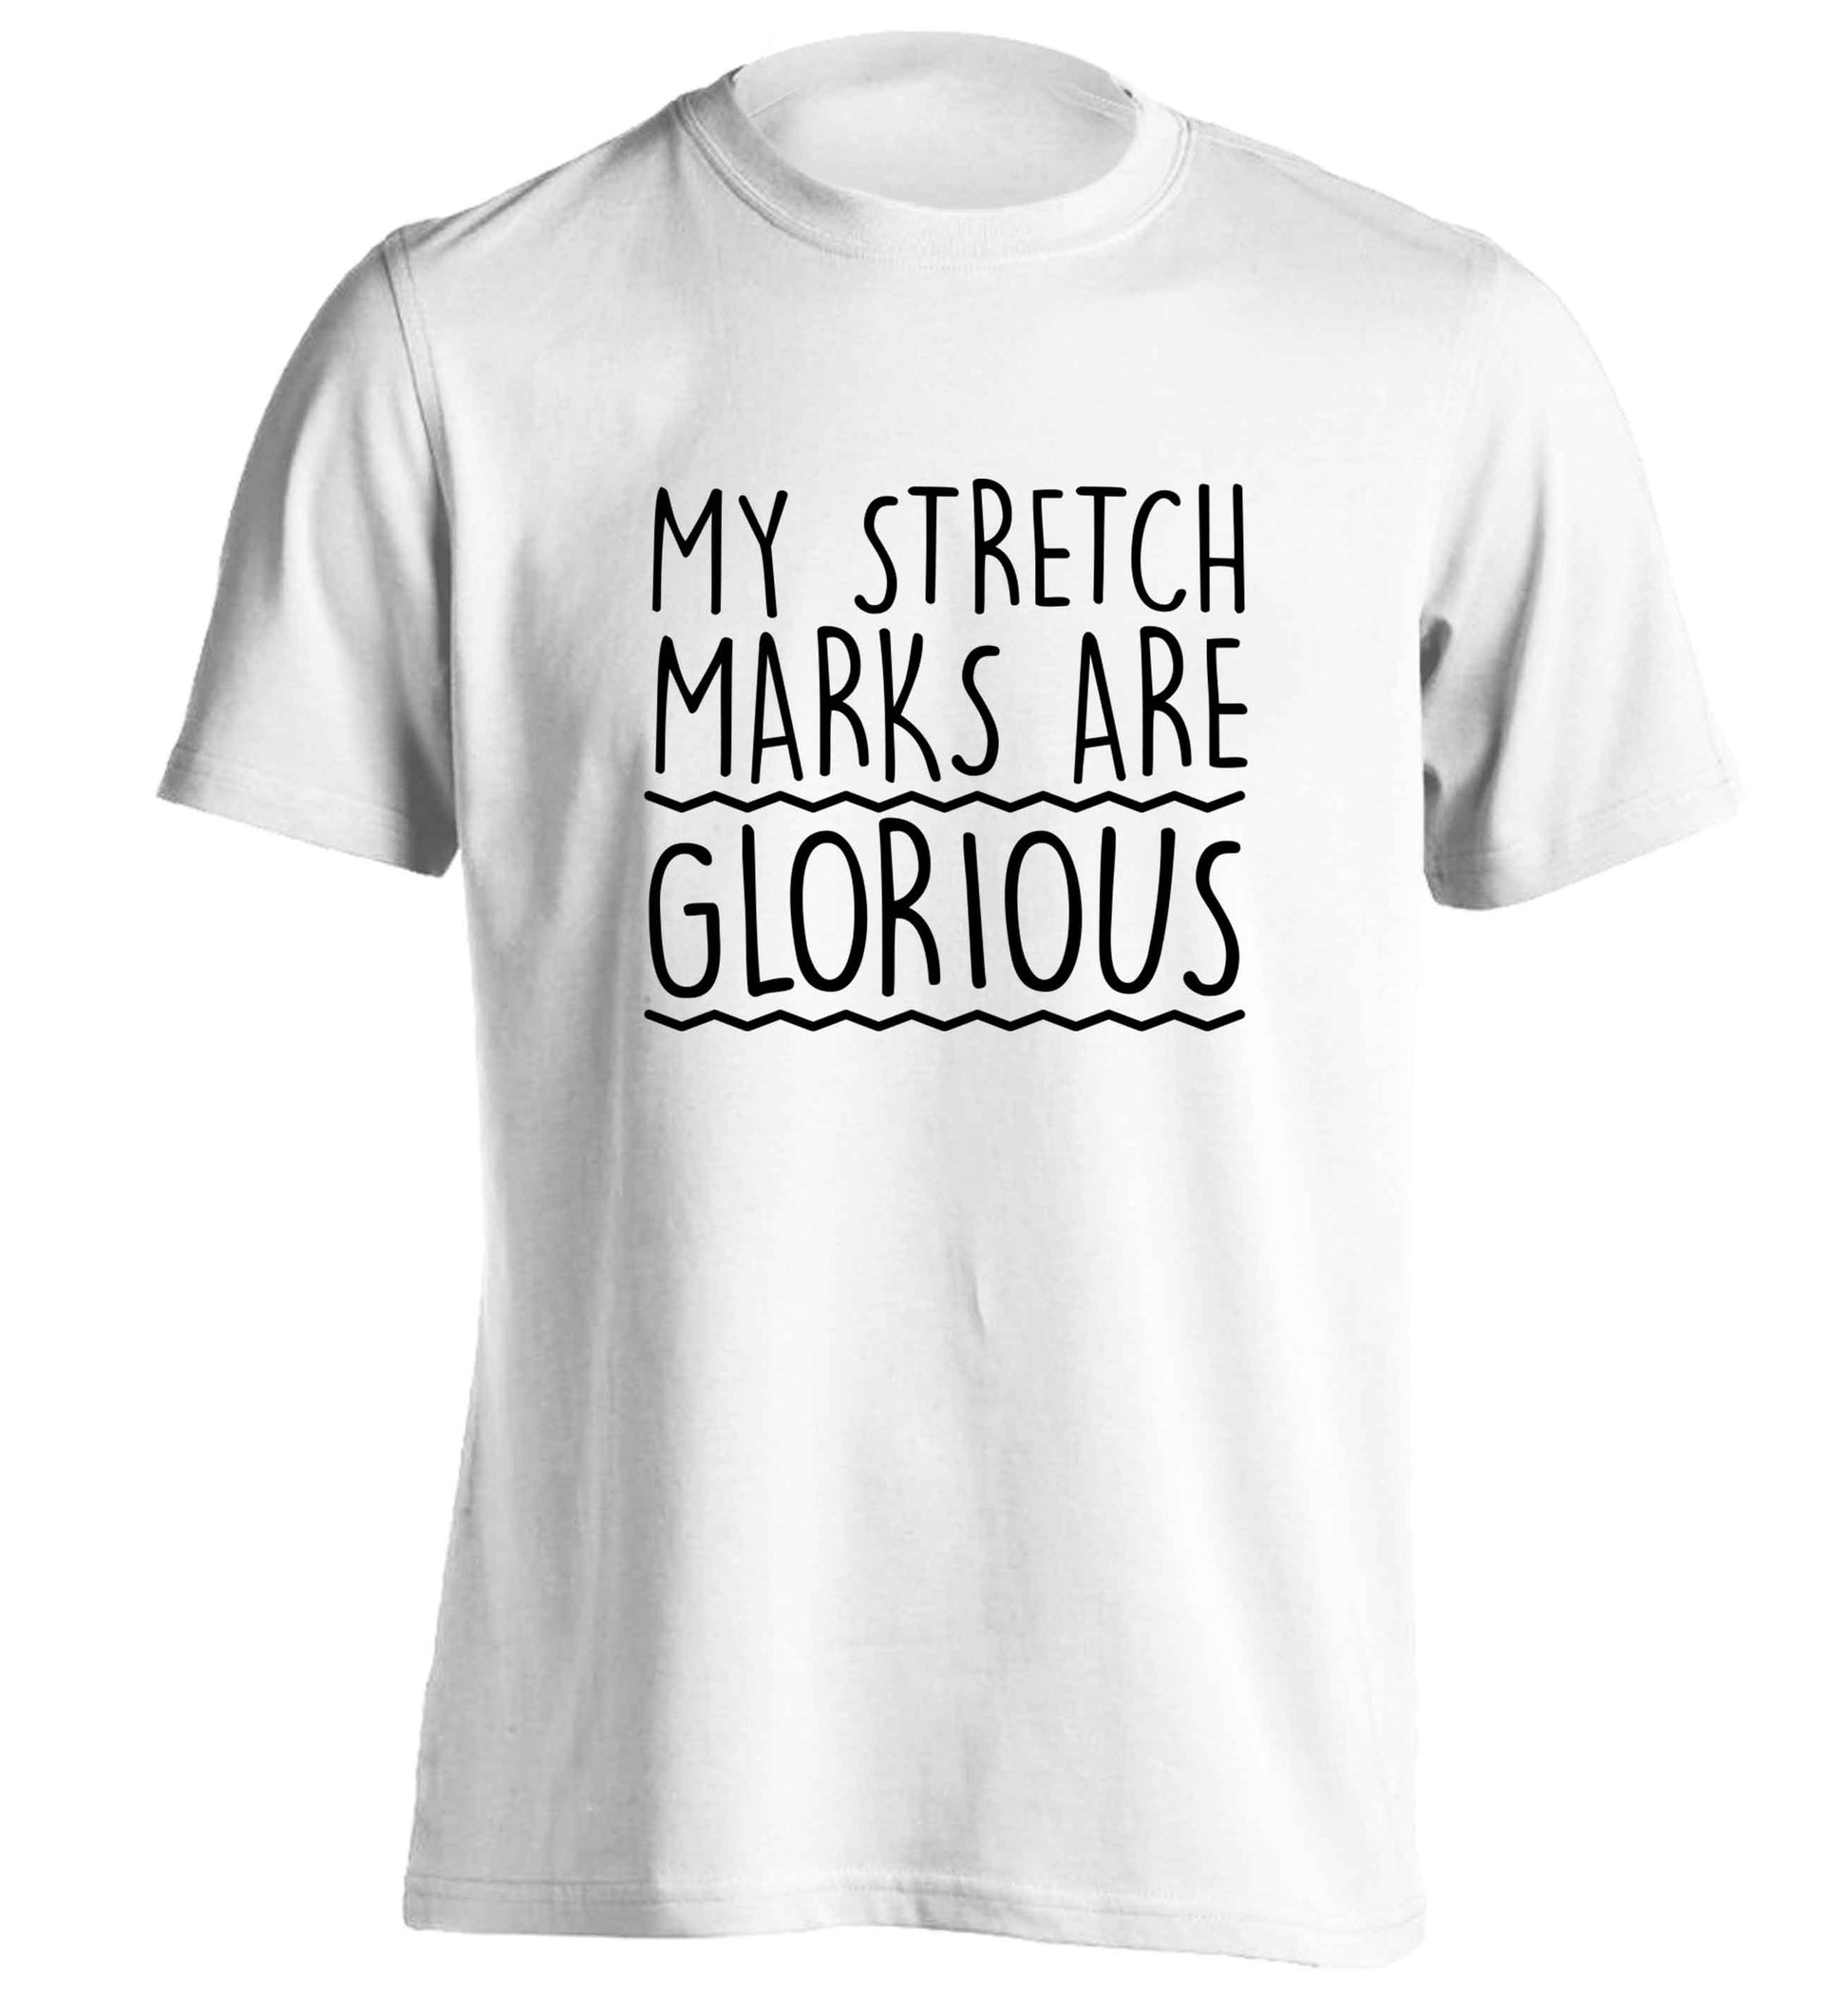 My stretch marks are glorious adults unisex white Tshirt 2XL